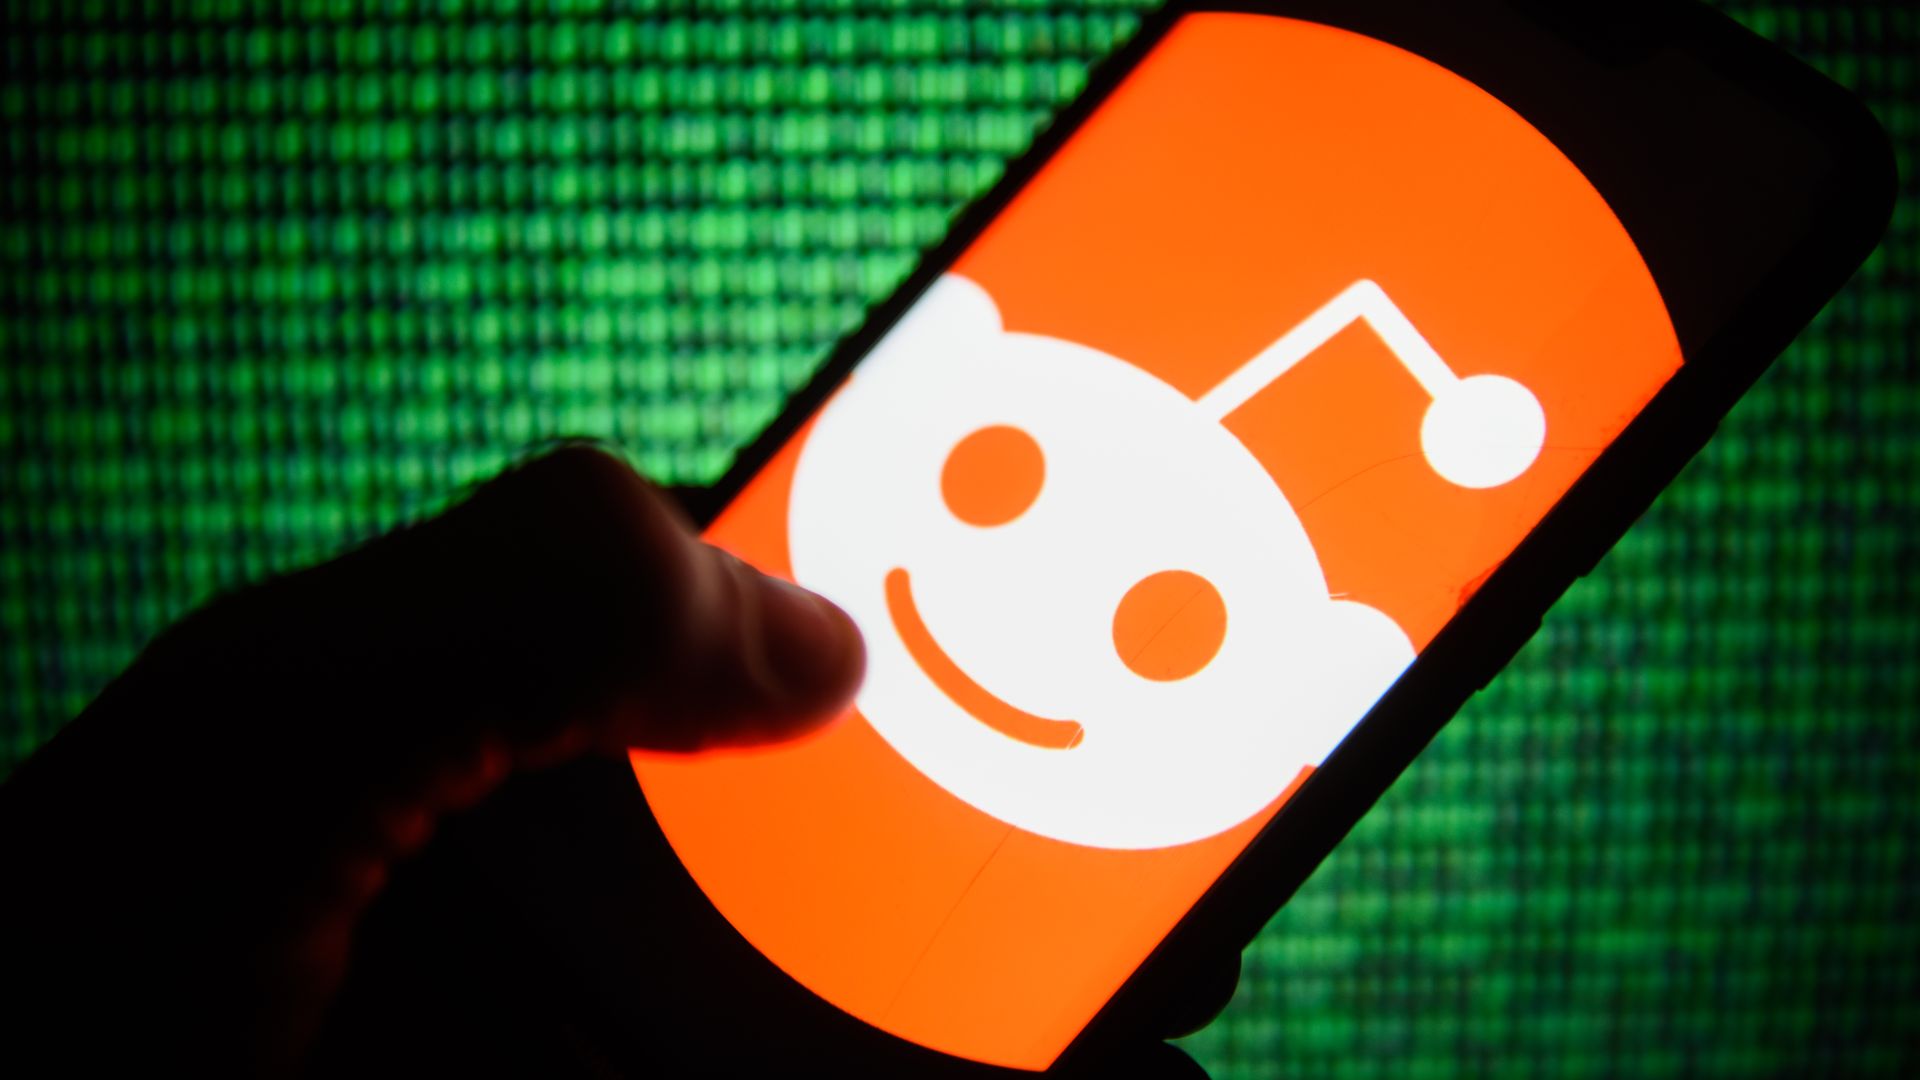 In this image, a person holds a smart phone with the Reddit logo displayed